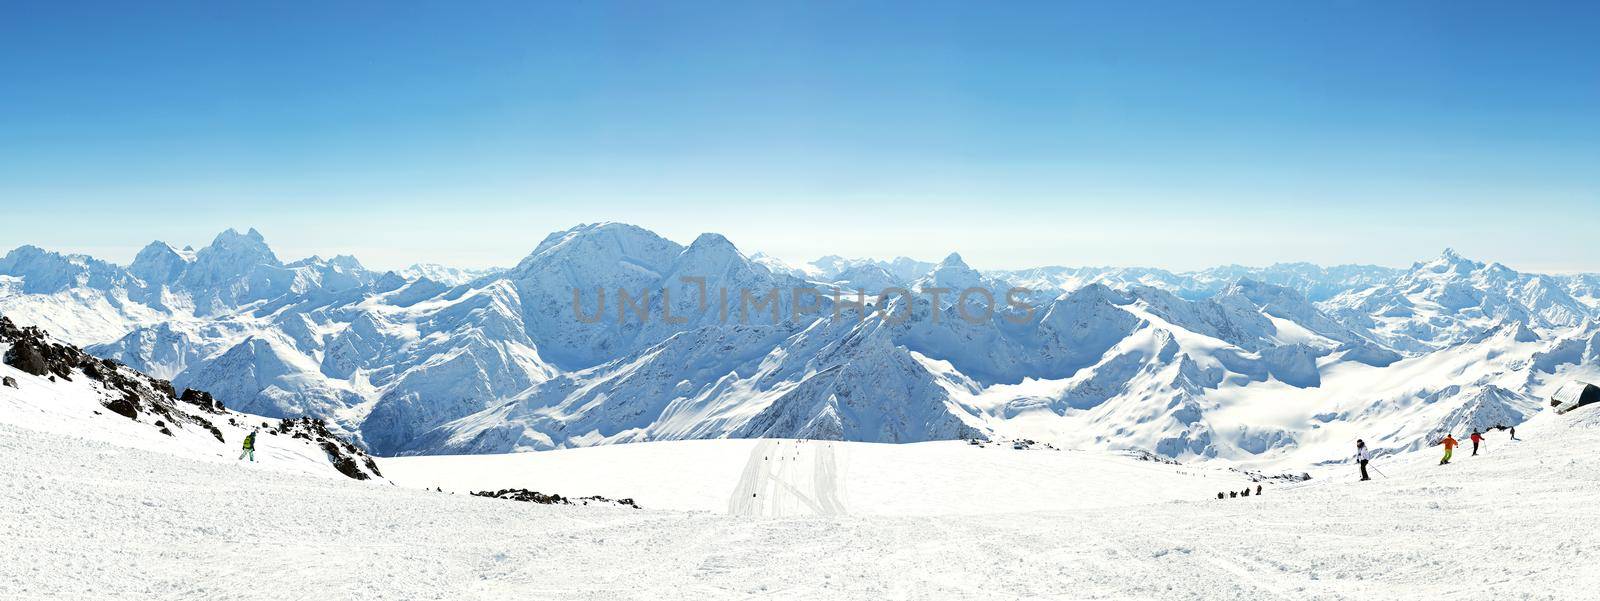 Panorama of winter mountains in Caucasus region,Elbrus mountain, Russia by Mariakray